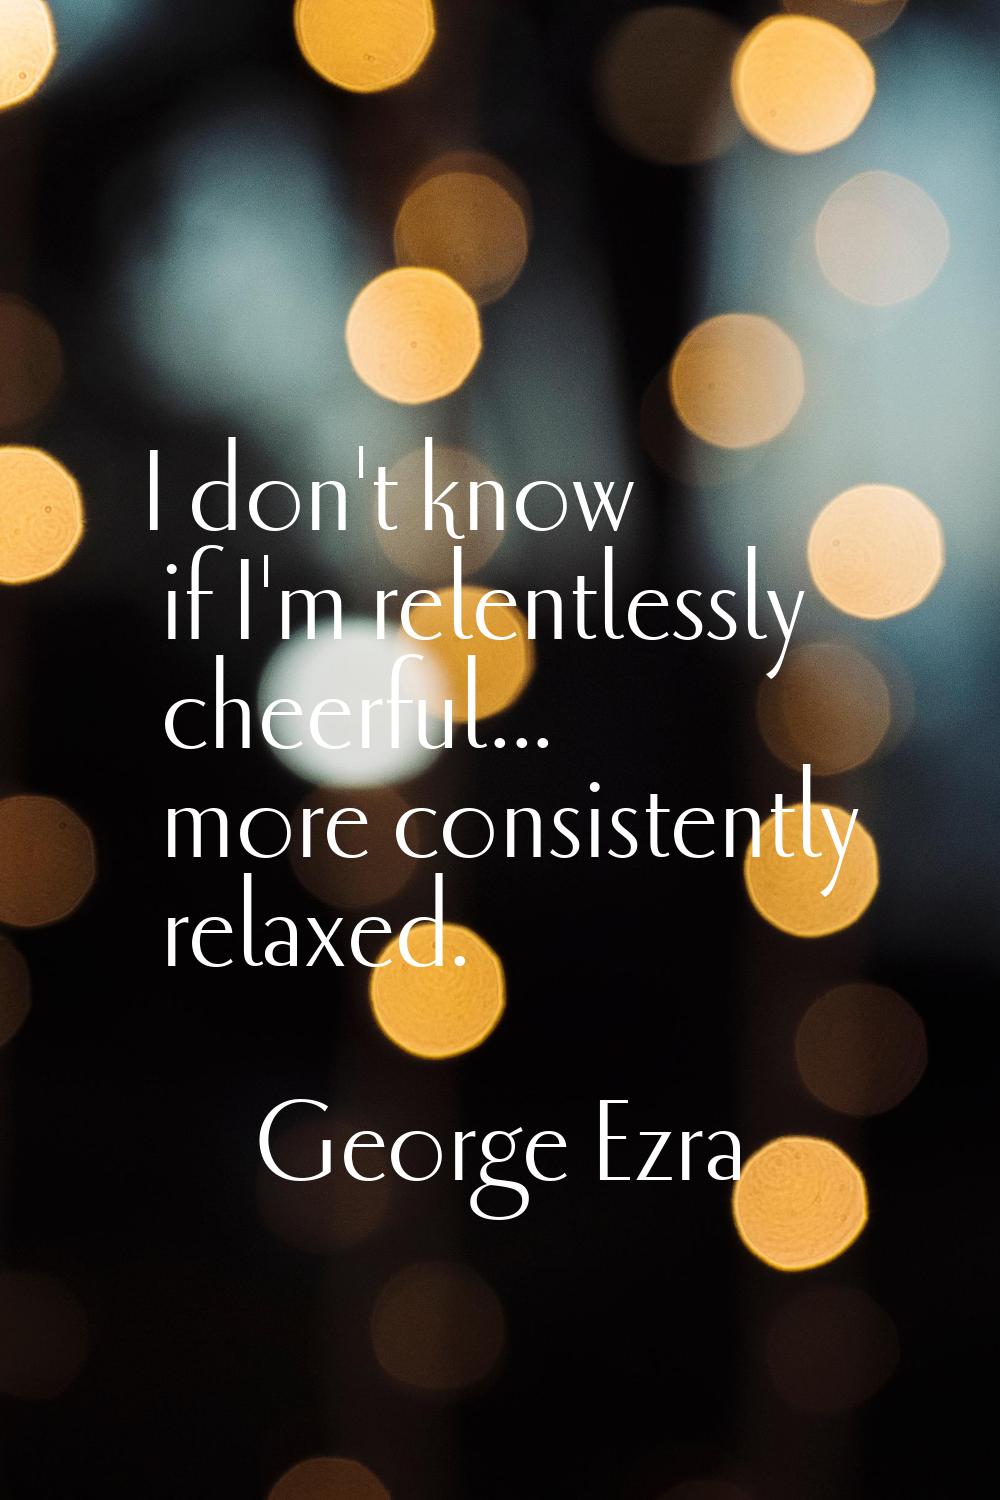 I don't know if I'm relentlessly cheerful... more consistently relaxed.